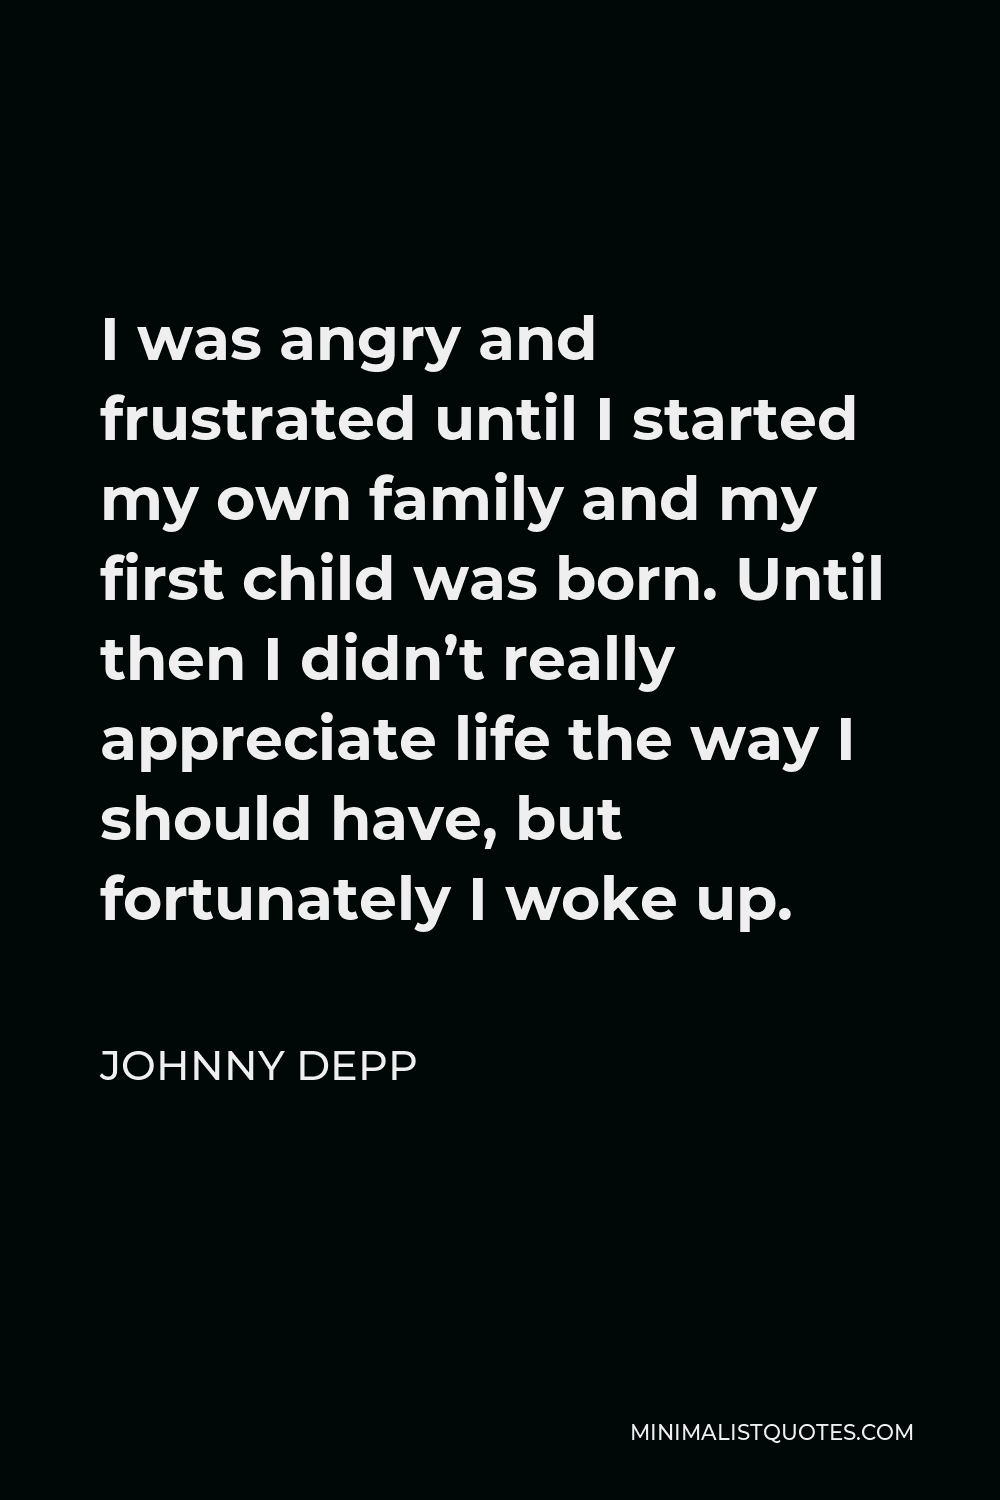 Johnny Depp Quote - I was angry and frustrated until I started my own family and my first child was born. Until then I didn’t really appreciate life the way I should have, but fortunately I woke up.